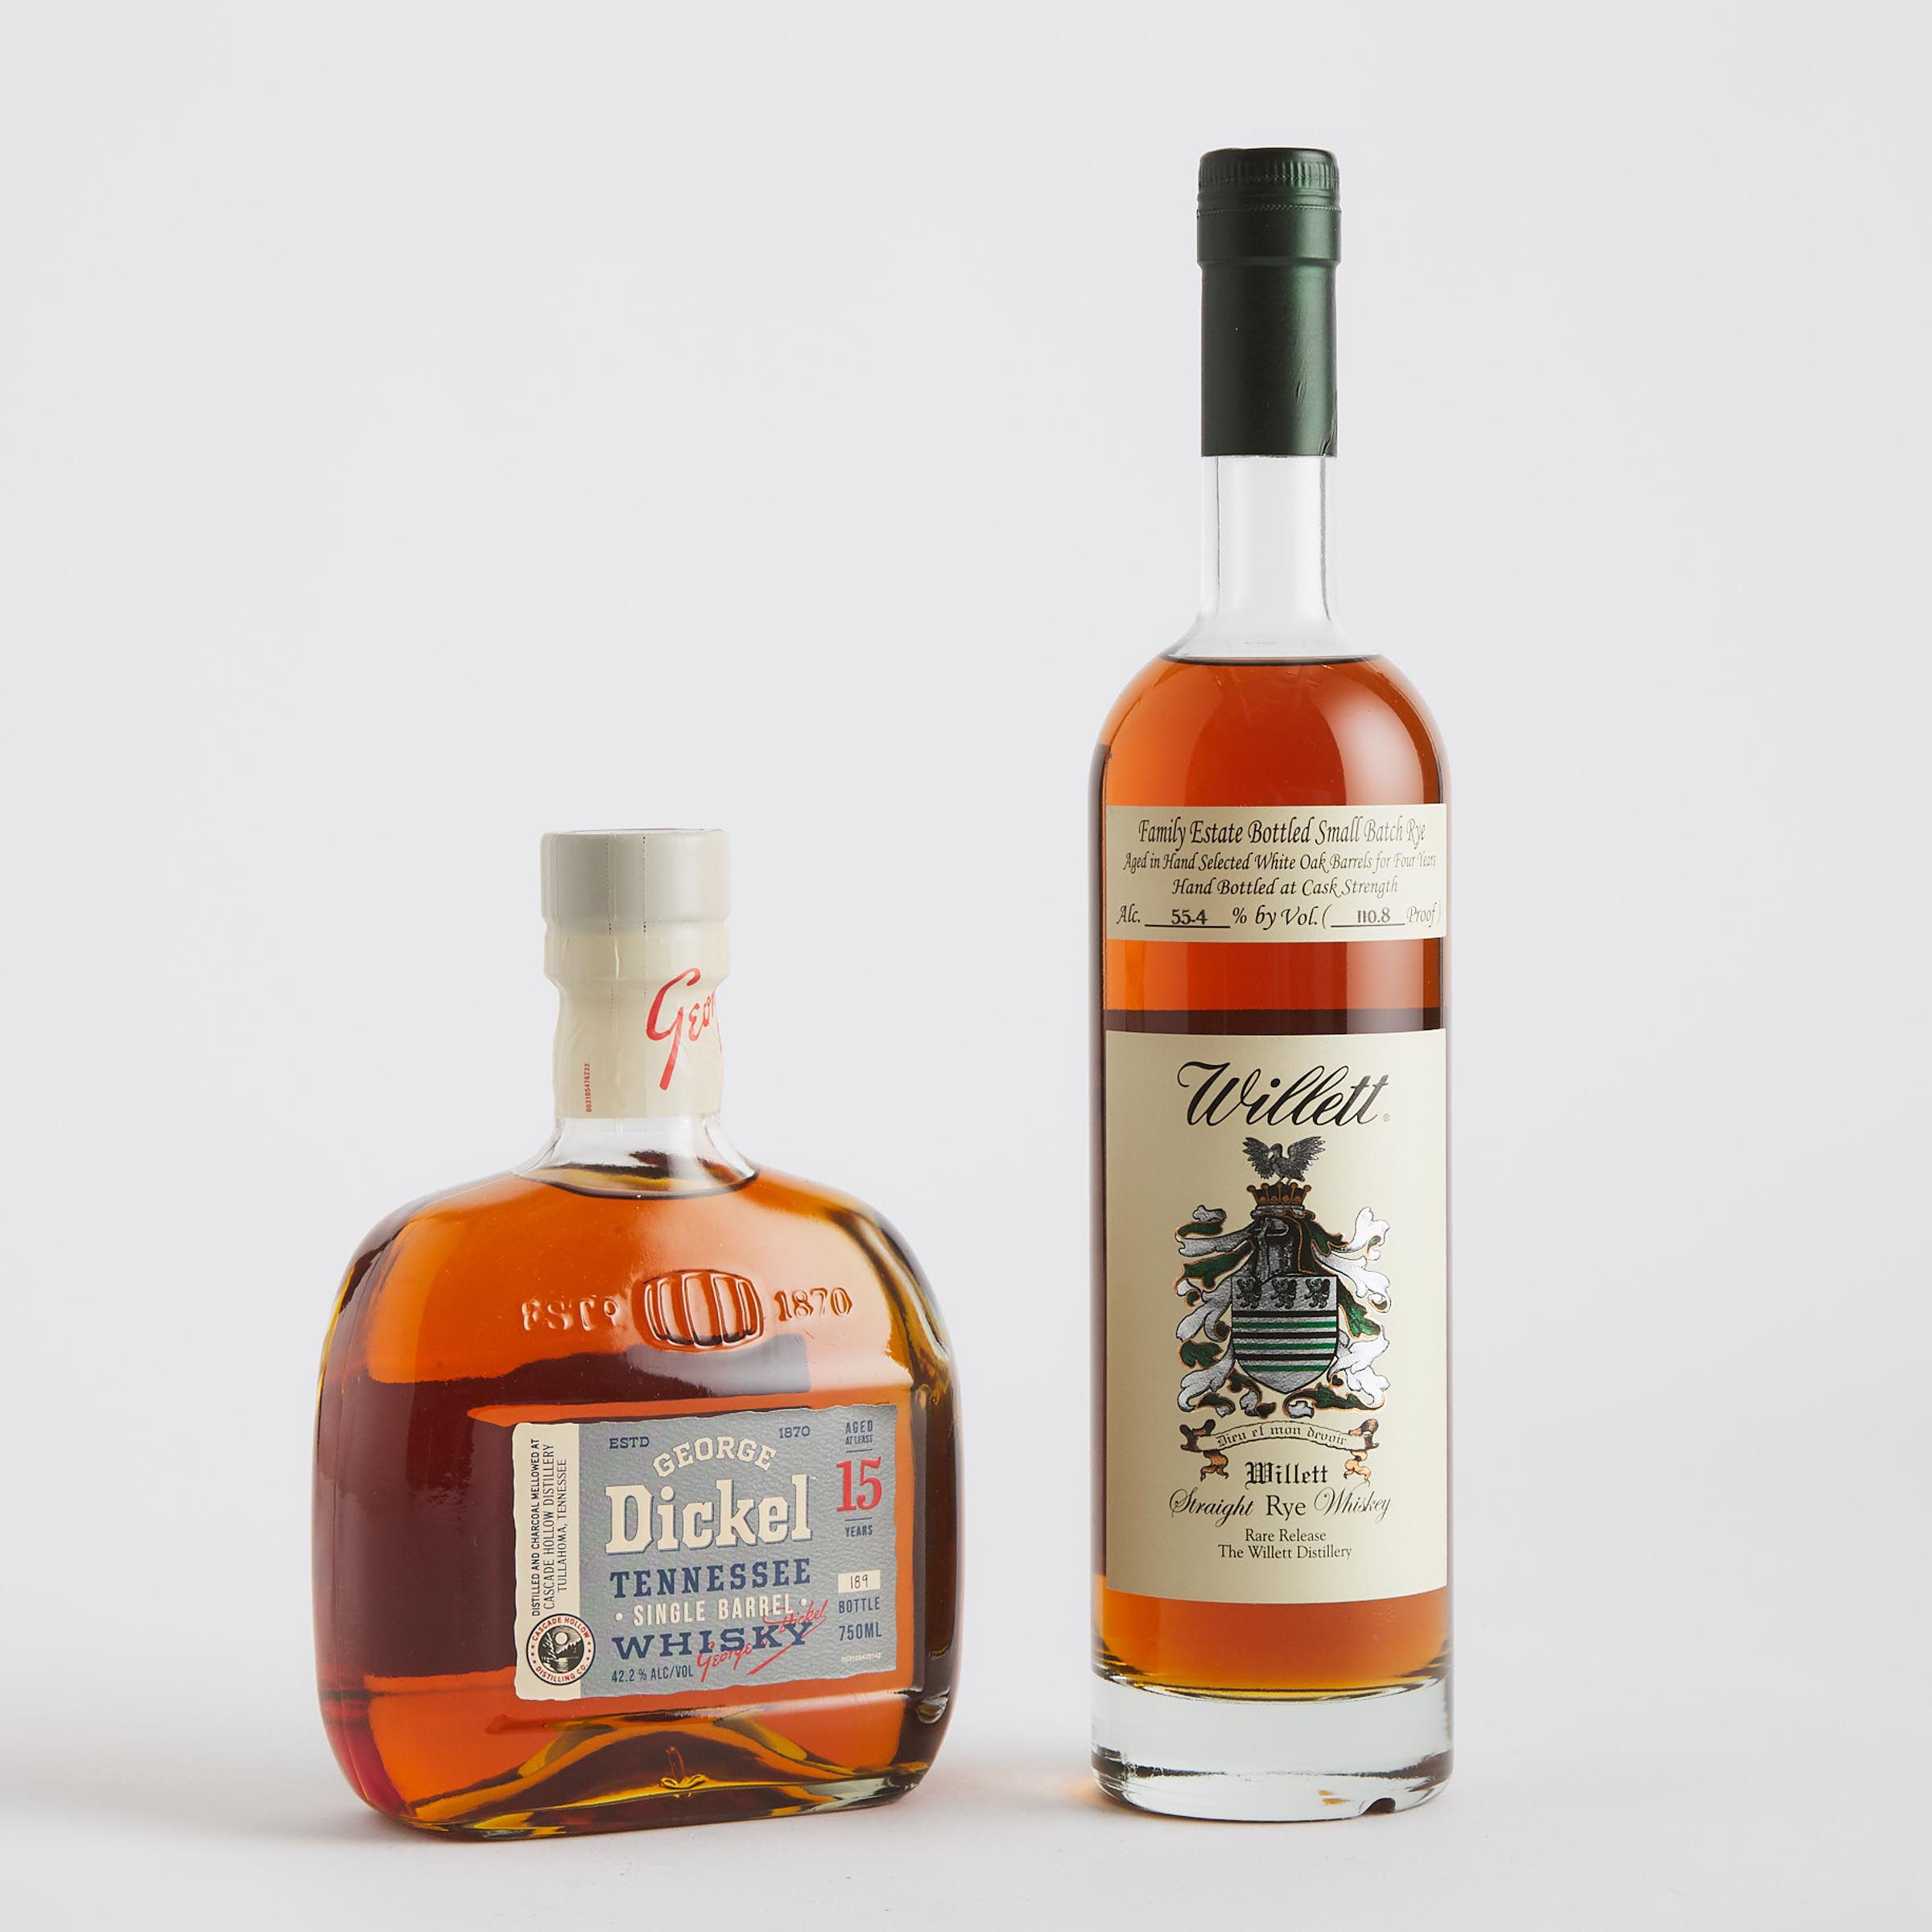 GEORGE DICKEL TENNESSEE SINGLE BARREL WHISKY 15 YEARS (ONE 750 ML)
WILLETT FAMILY ESTATE STRAIGHT RYE WHISKEY 4 YEARS (ONE 750 ML)